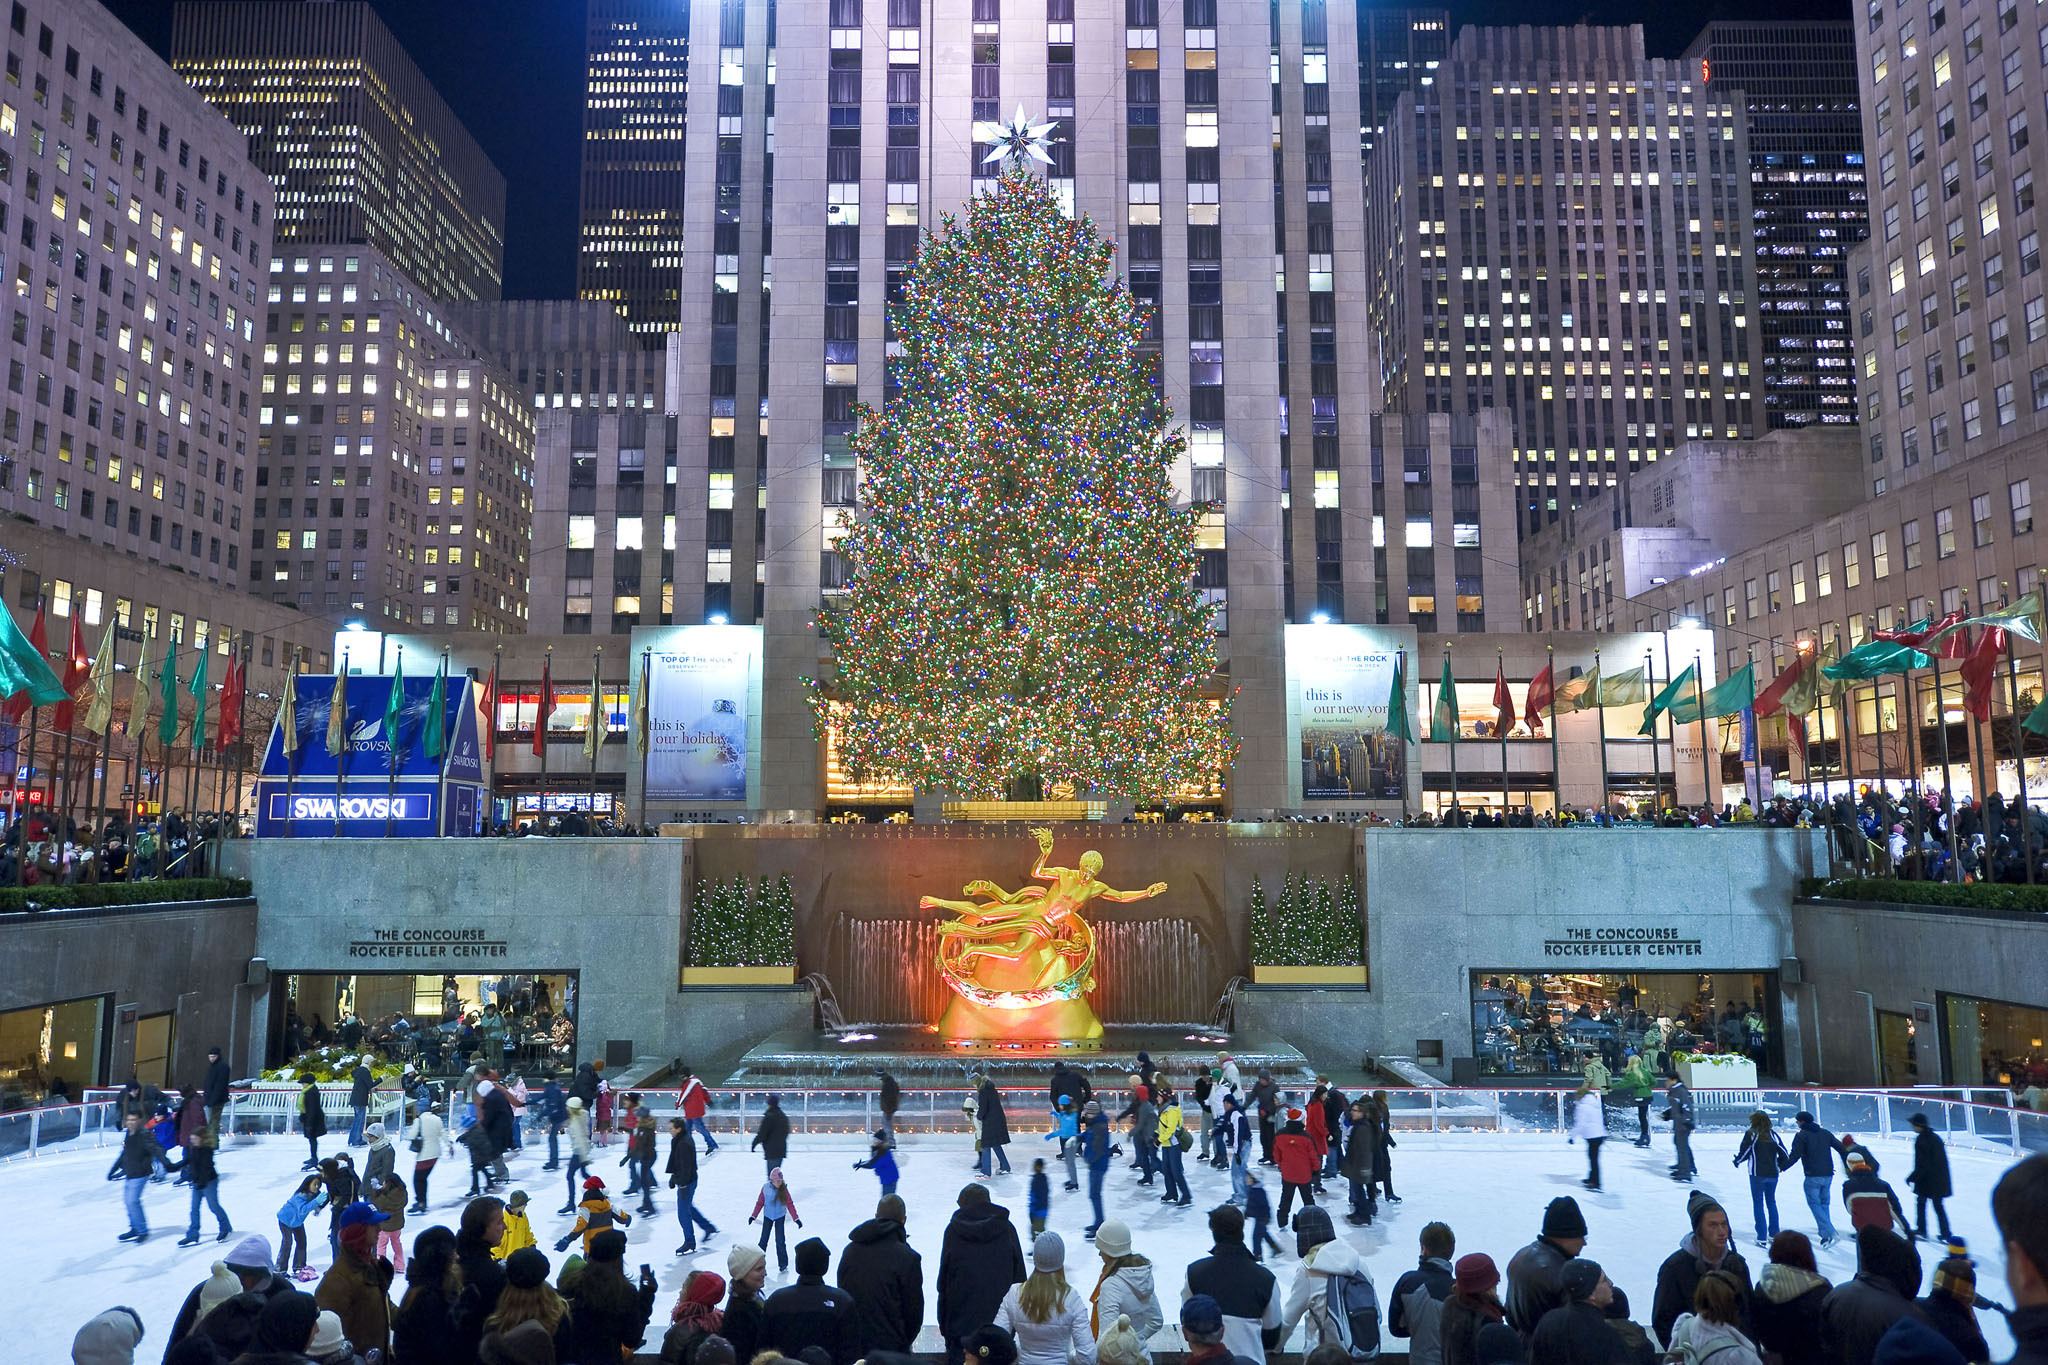 Rockefeller Center, Location to Visit the NBC News and Saturday Night